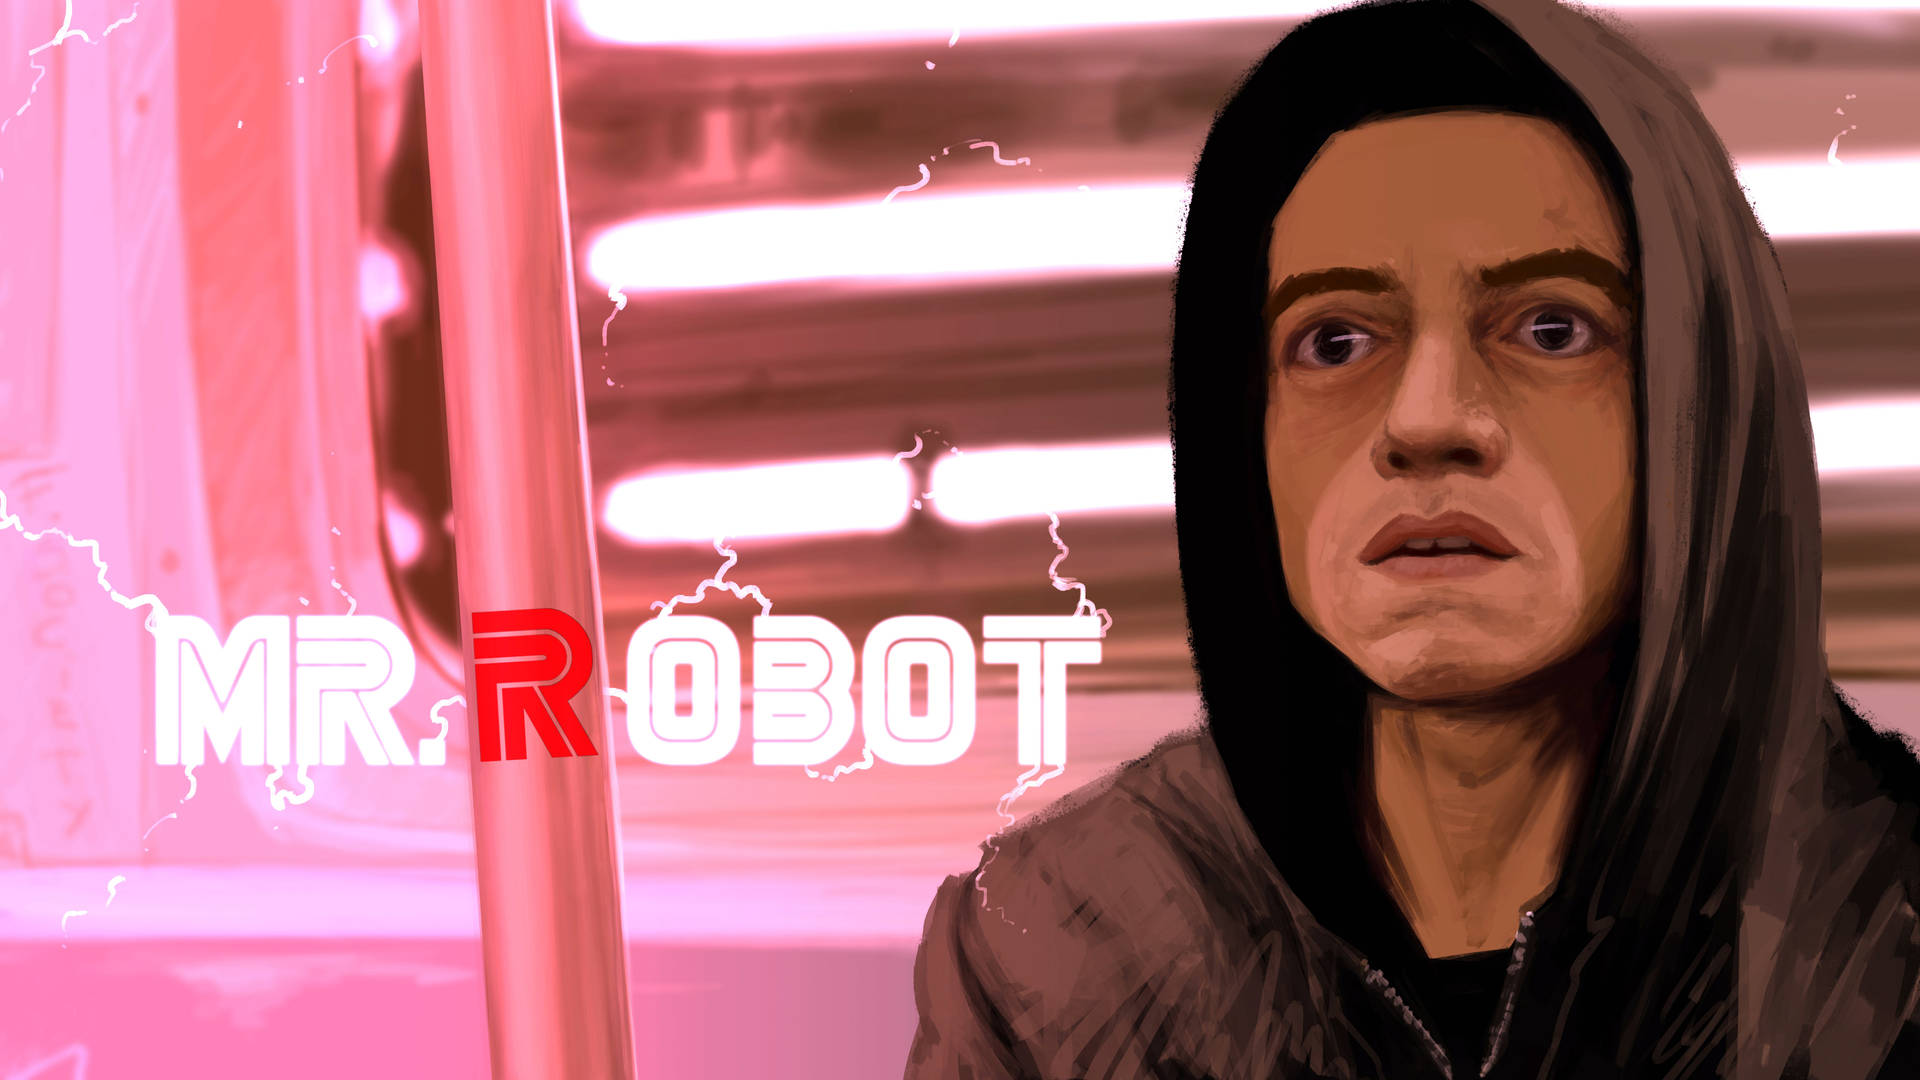 Mr Robot 4096X2304 Wallpaper and Background Image